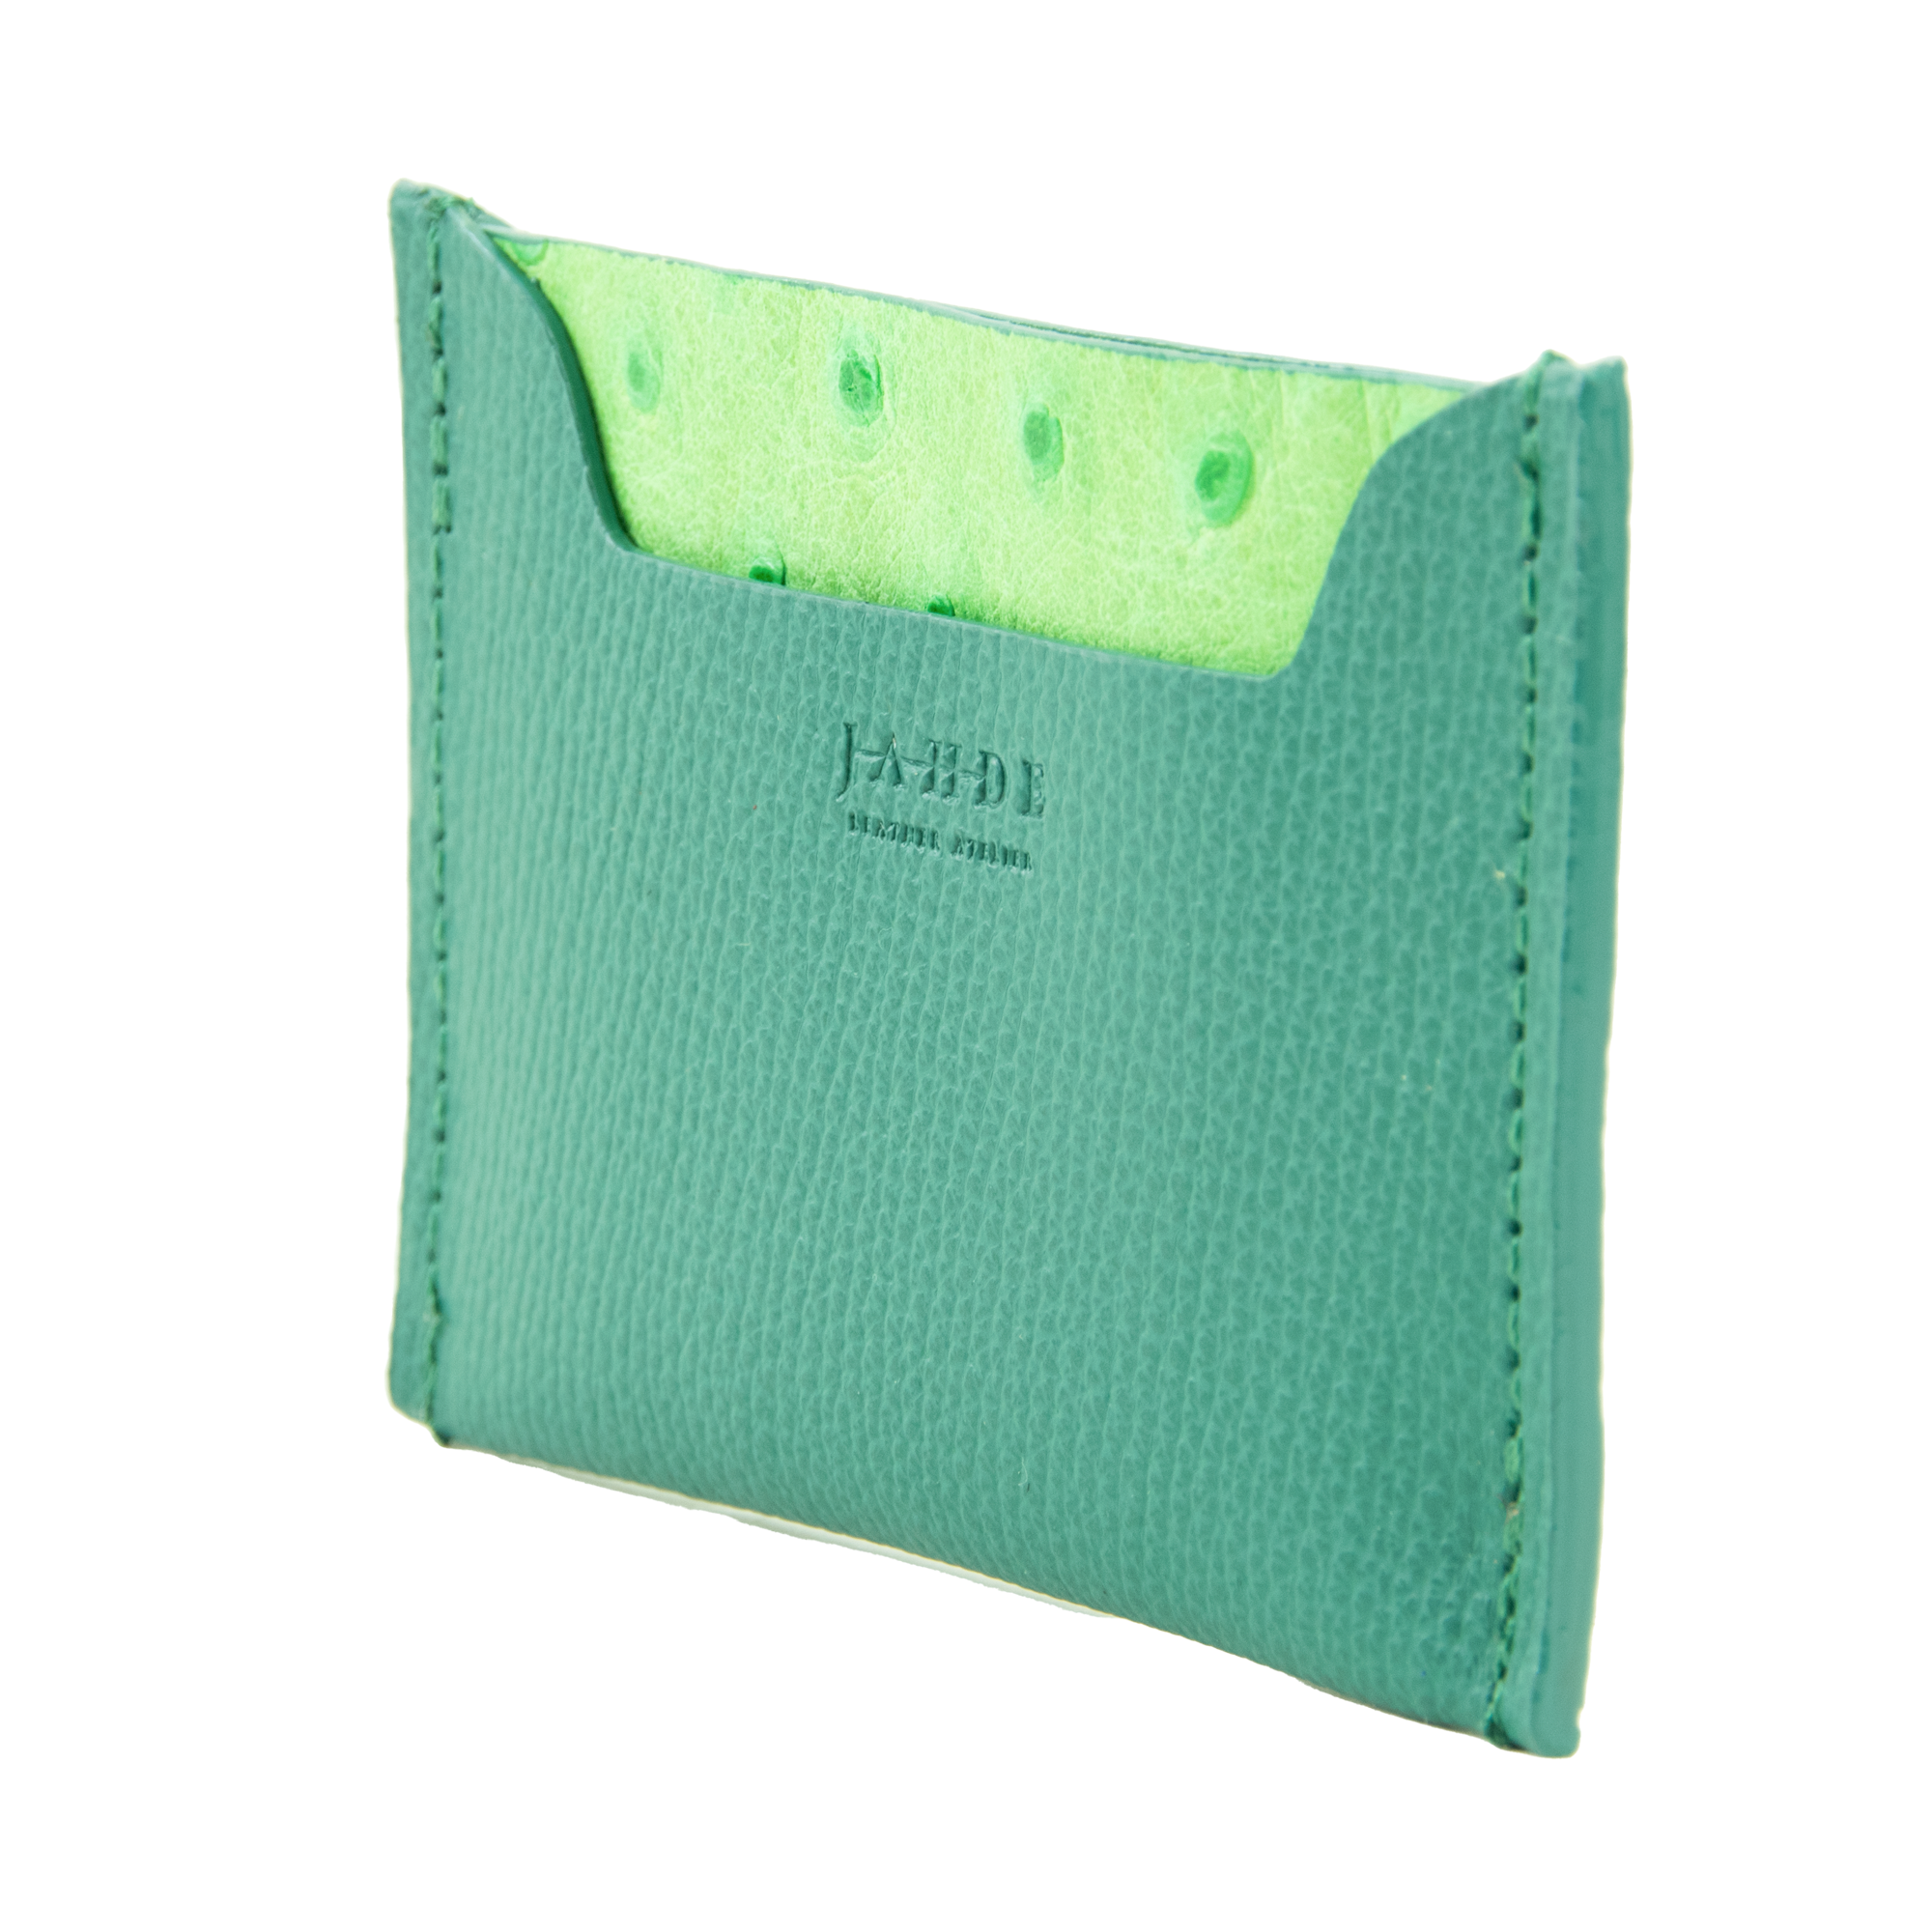 Jahde Leather Society Wallet